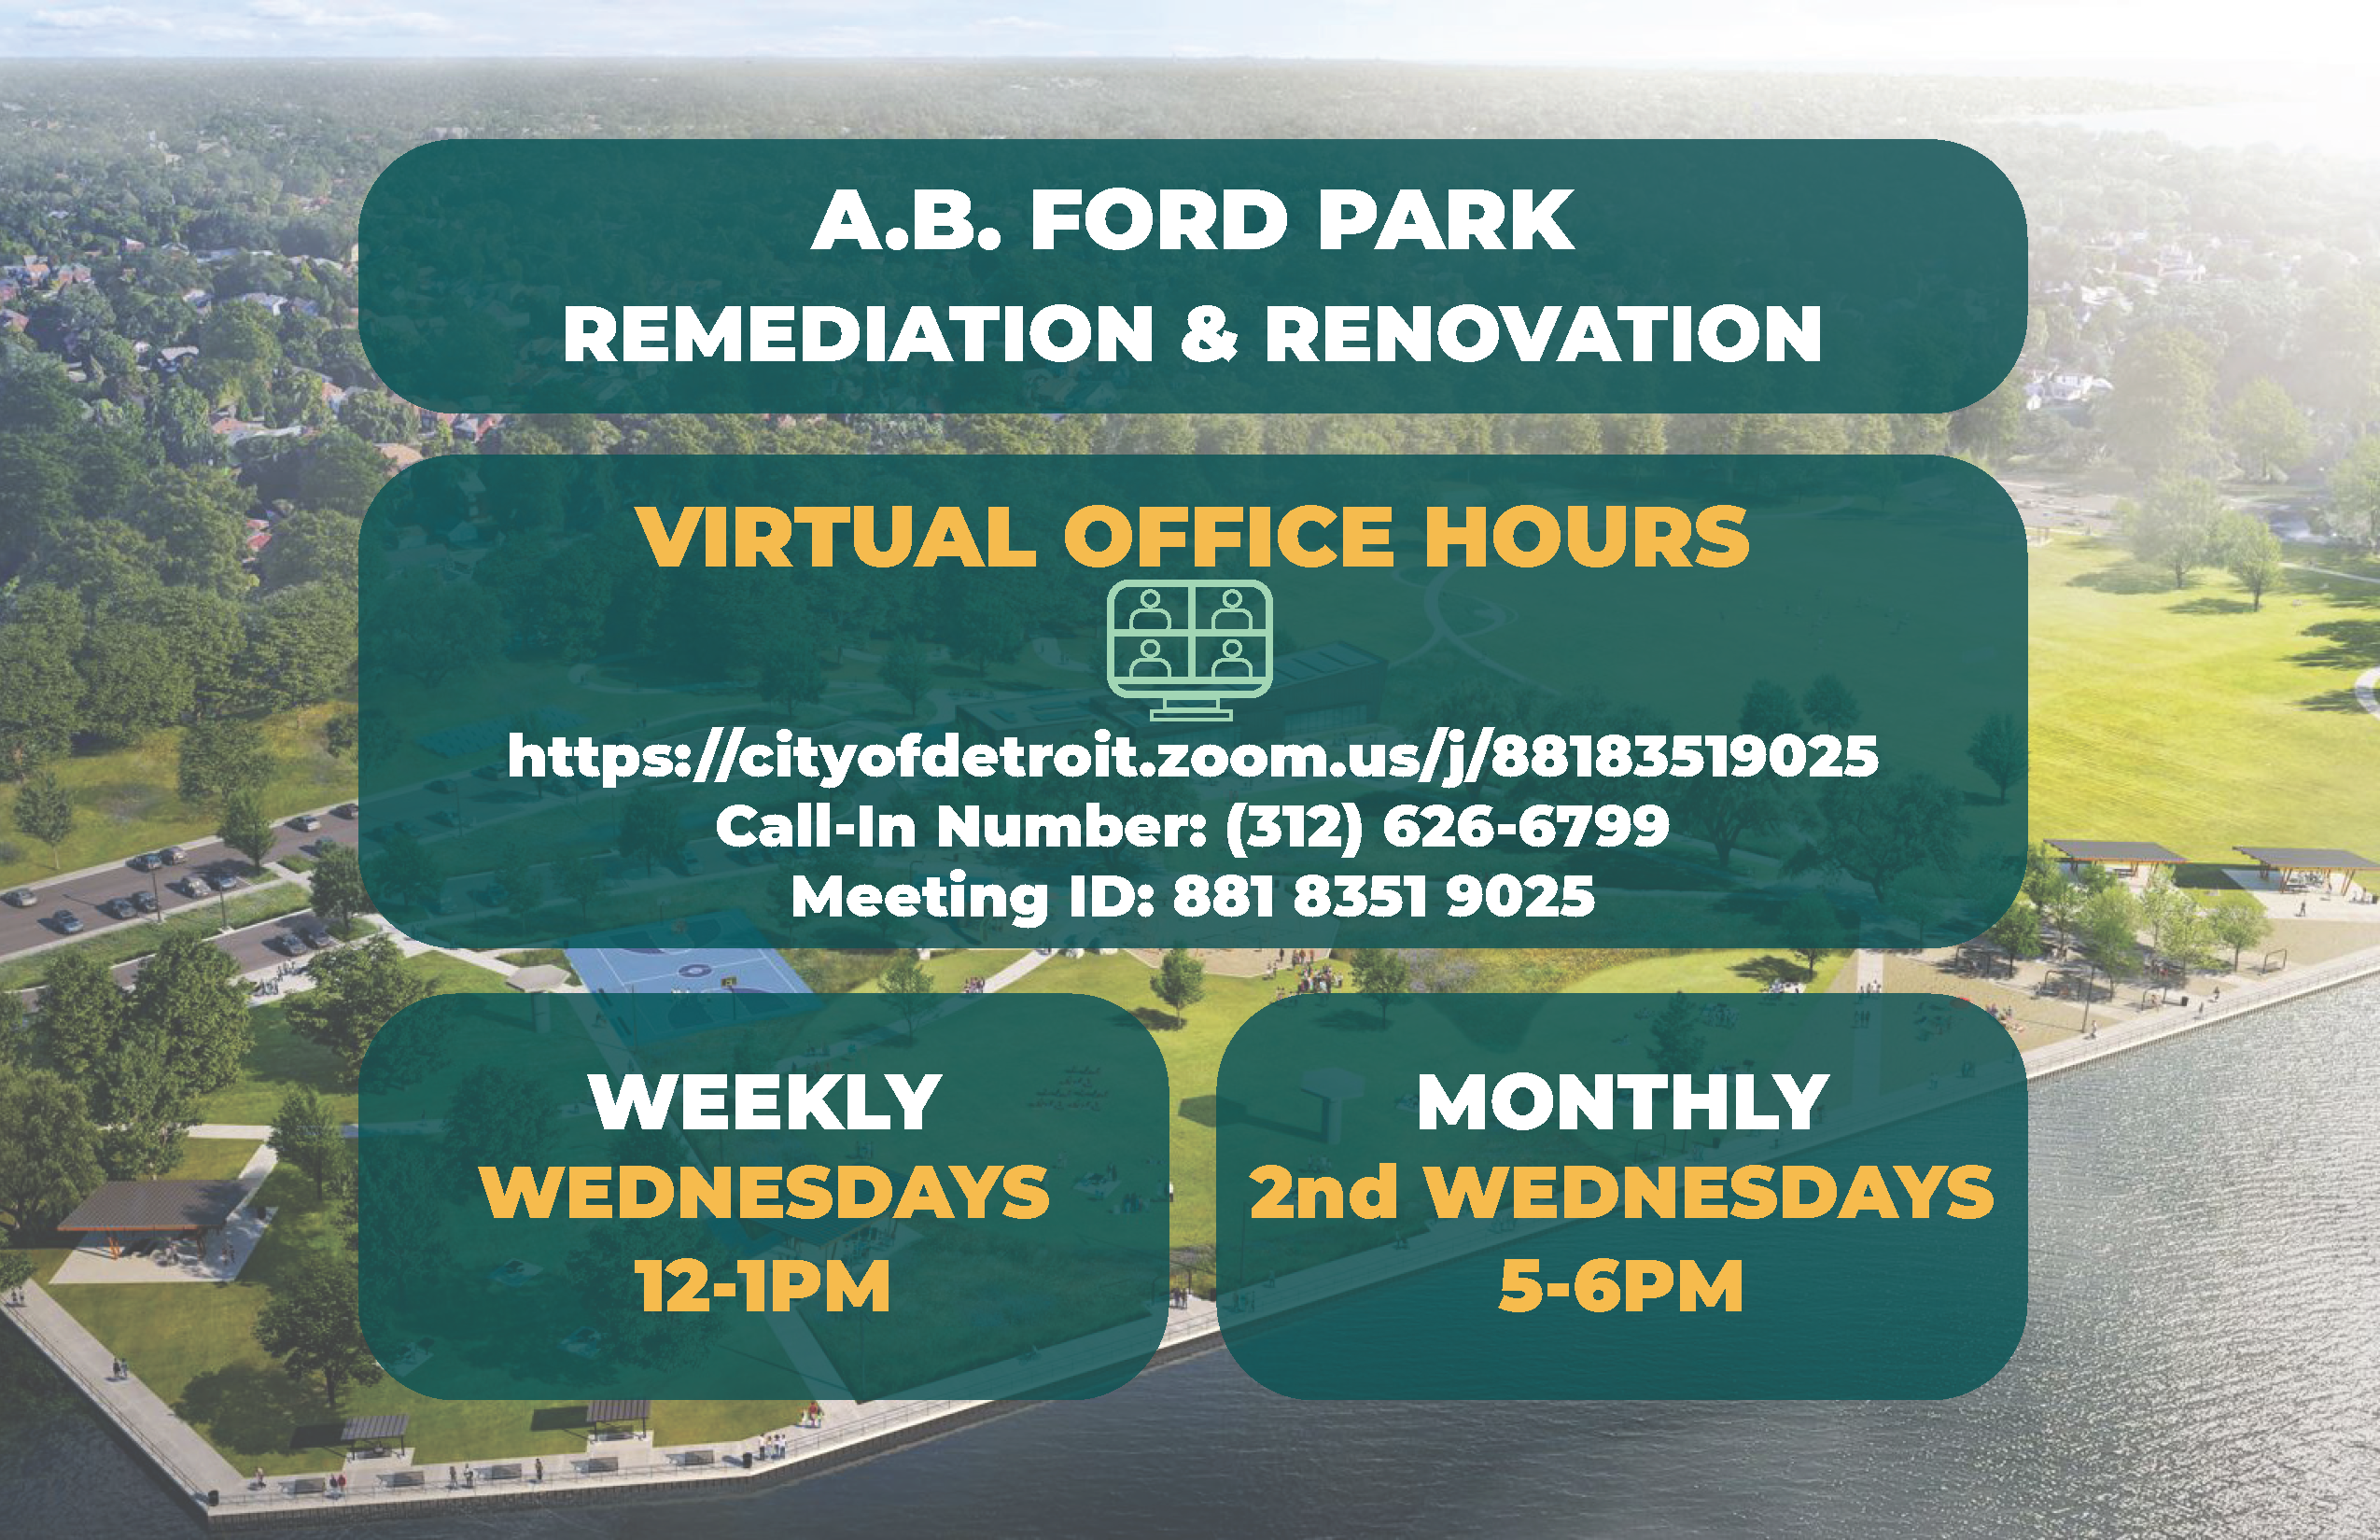 Office Hours for AB Ford Construction Project WEEKLY WEDNESDAYS 12-1PM MONTHLY 2nd WEDNESDAYS 5-6PM Click here to enter.